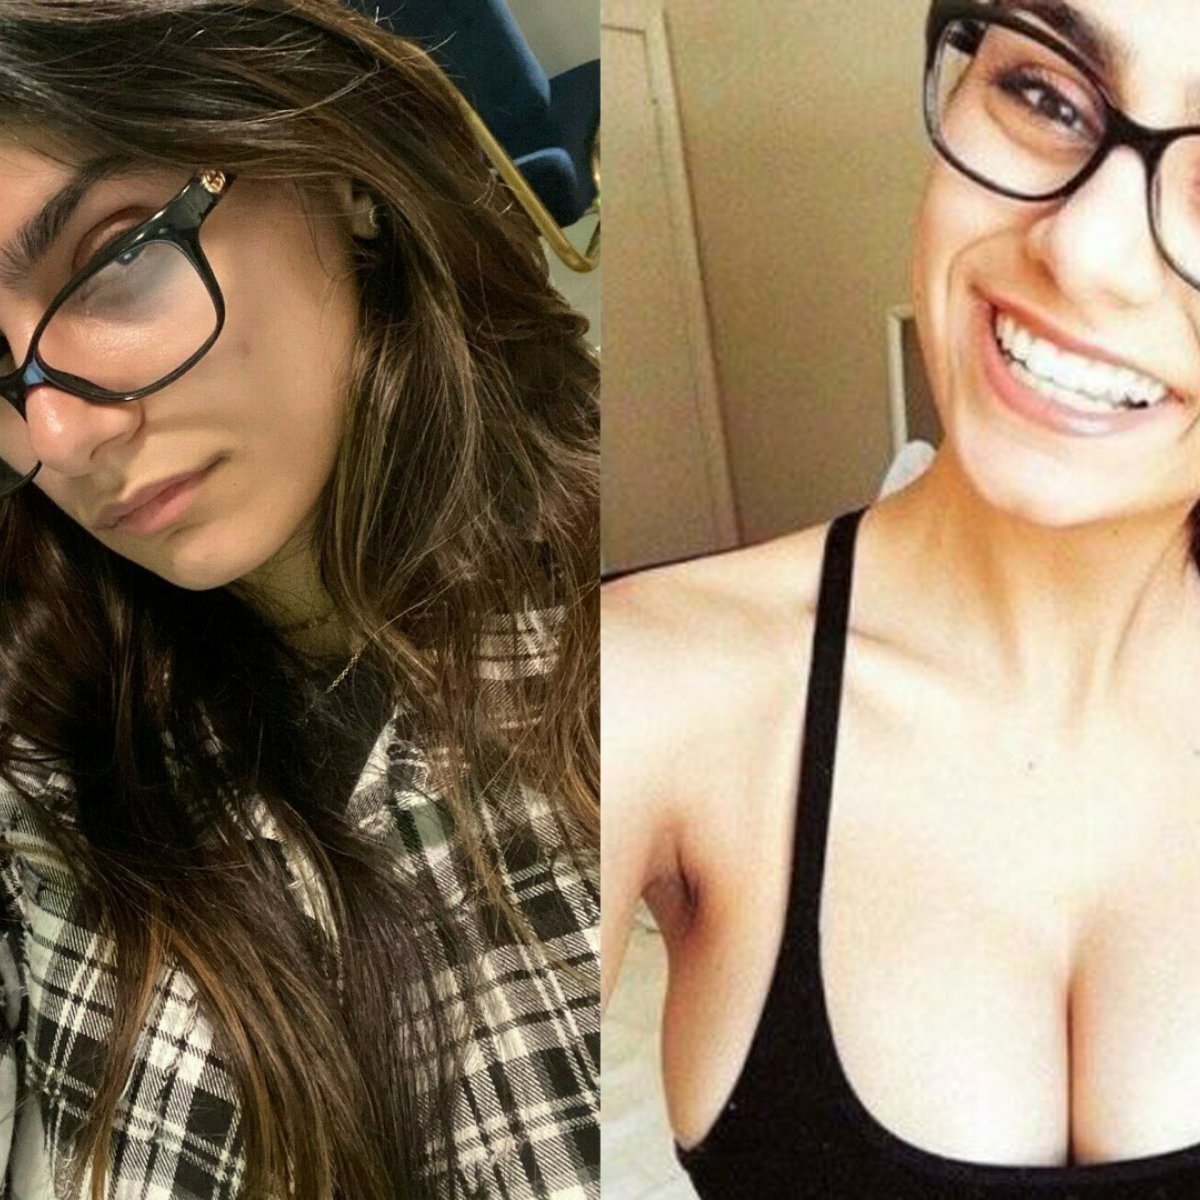 cathy aucoin recommends download mia khalifa porn videos pic